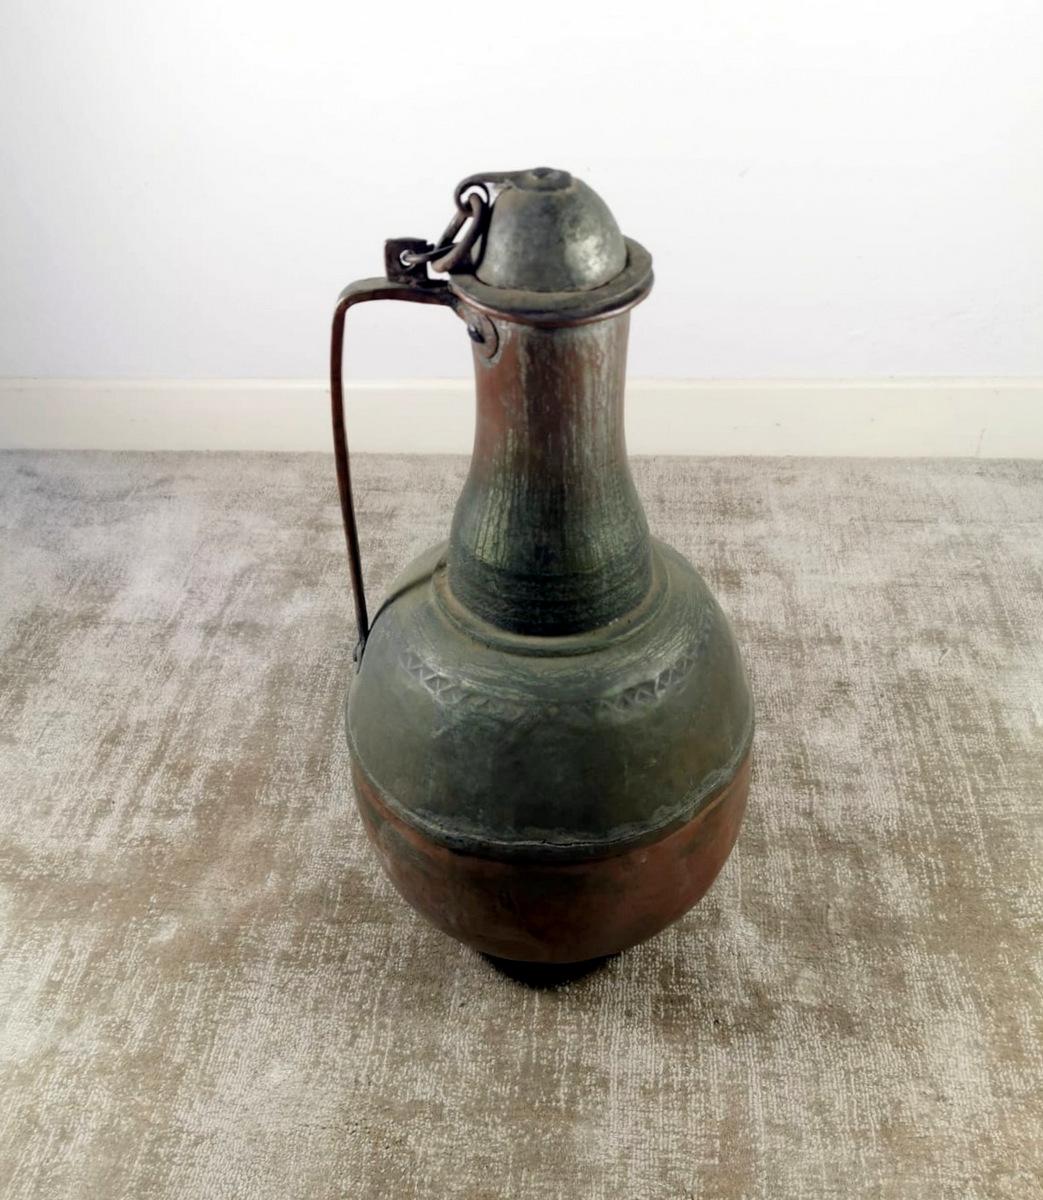 We kindly suggest you read the whole description, because with it we try to give you detailed technical and historical information to guarantee the authenticity of our objects.
The jug was made in Spain in the early 1800s in hand-hammered copper of